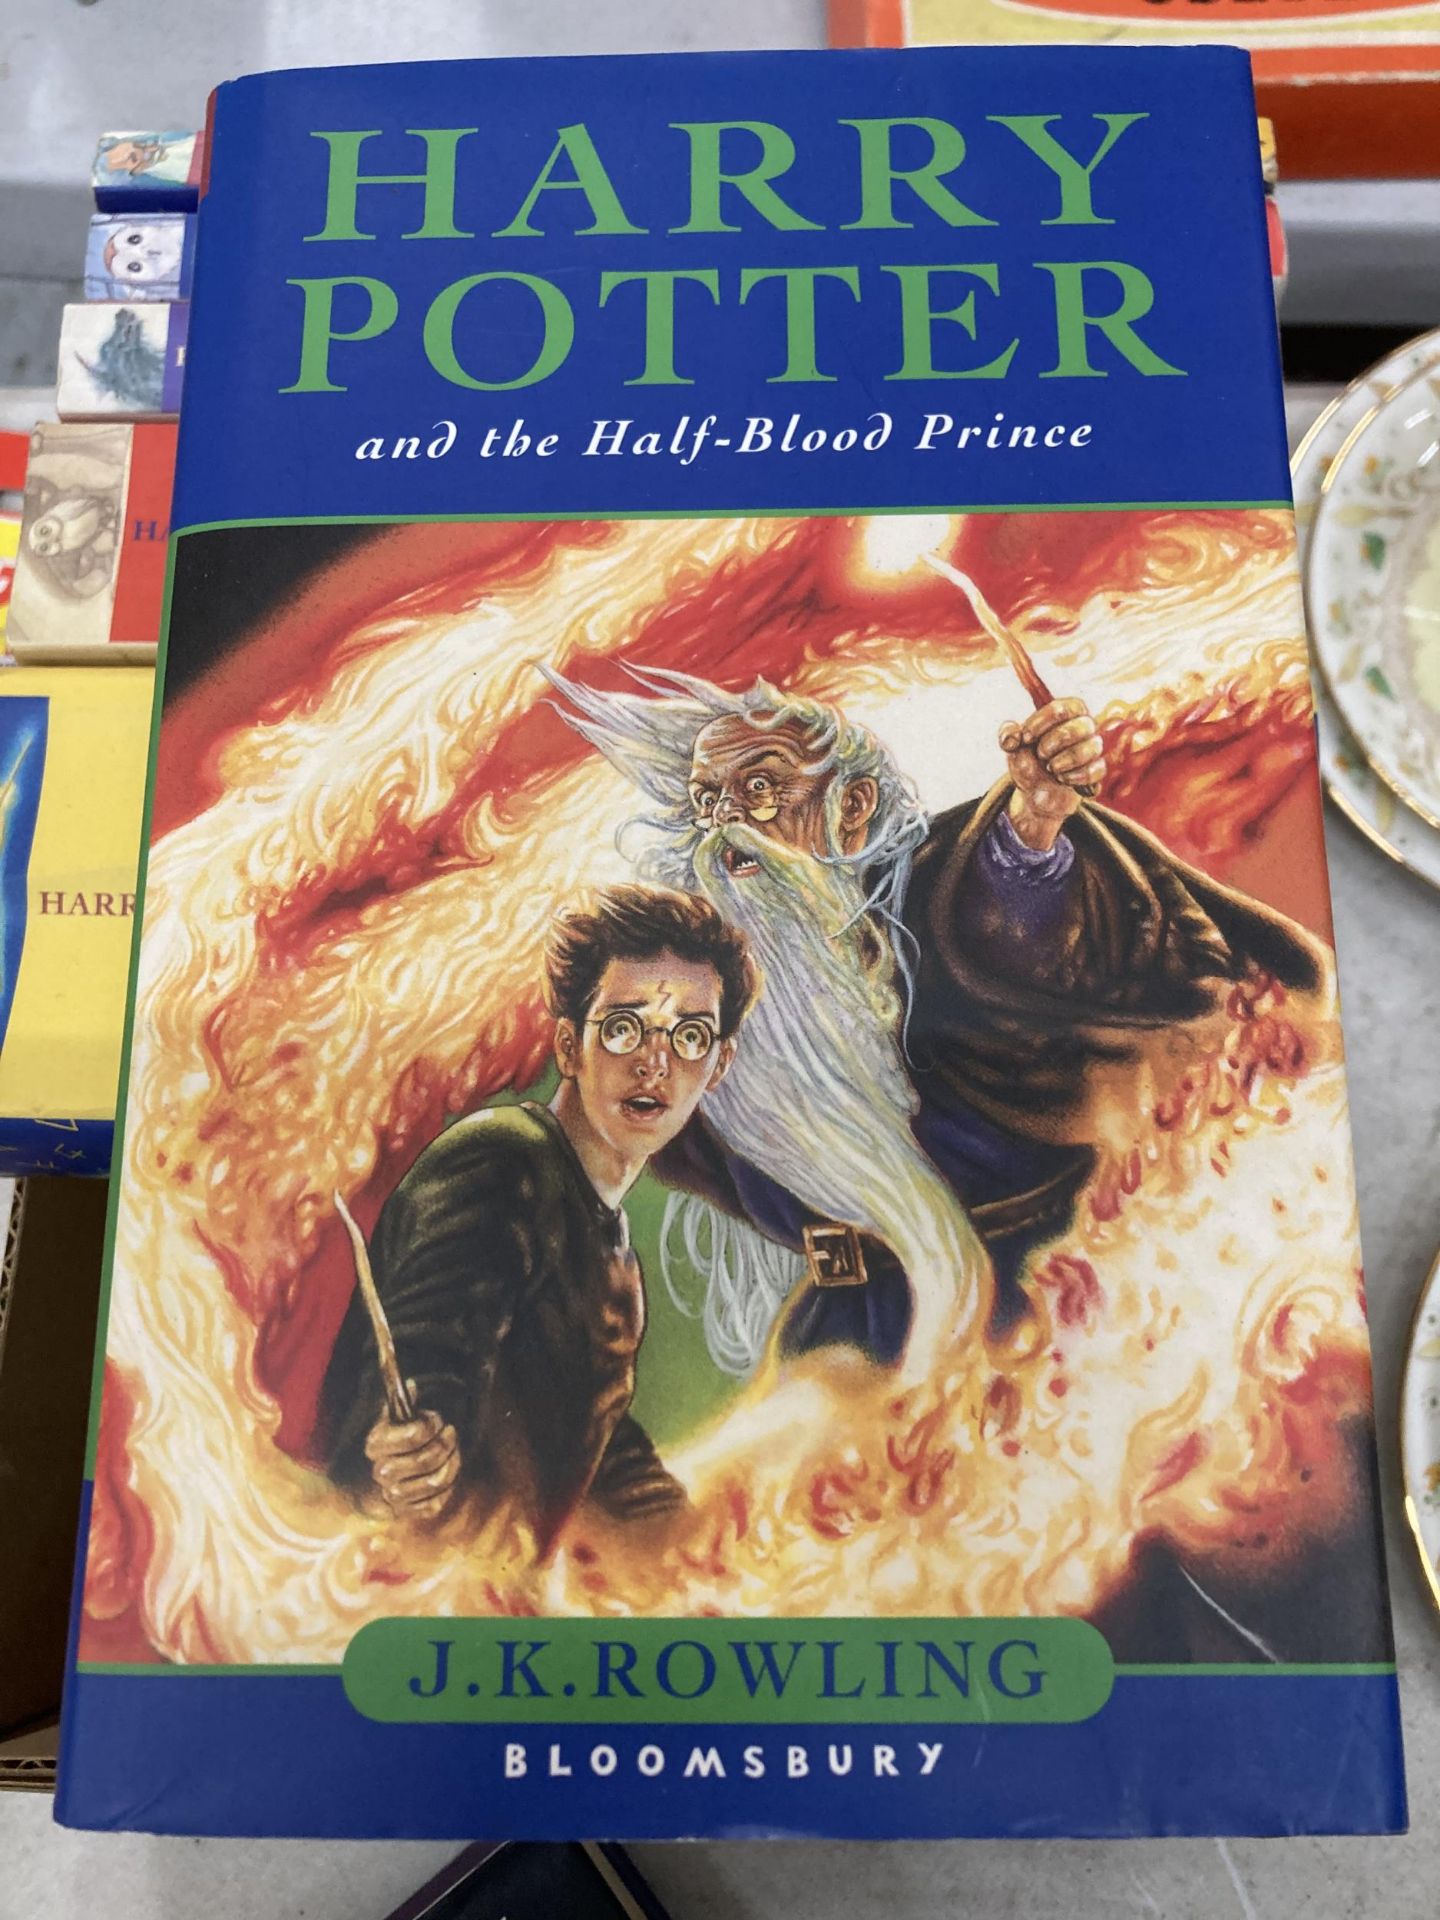 THE HARRY POTTER 1-7 BOOK SET - Image 3 of 4